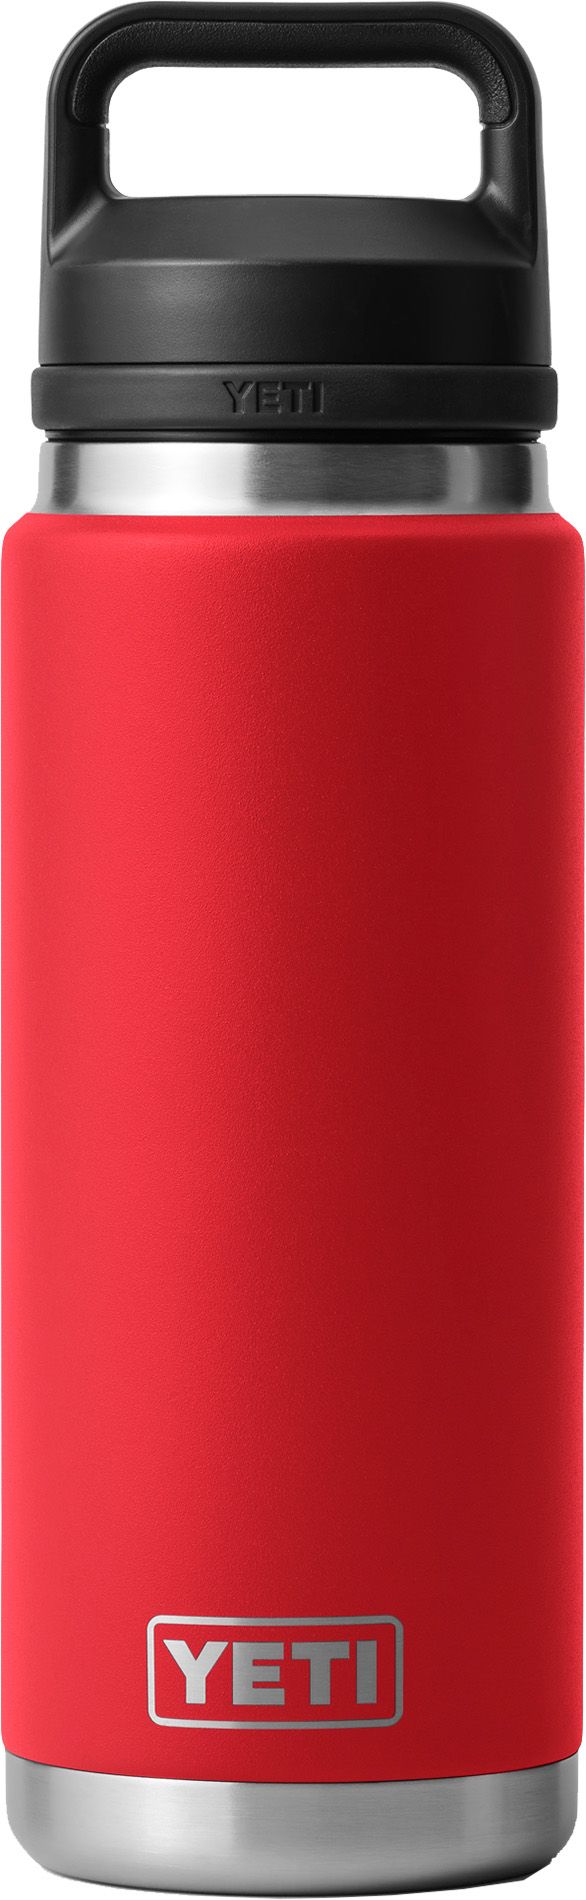 Photos - Other Accessories Yeti 26 oz. Rambler Bottle with Chug Cap, Rescue Red 20YETURMBLR26ZBTTHYD 